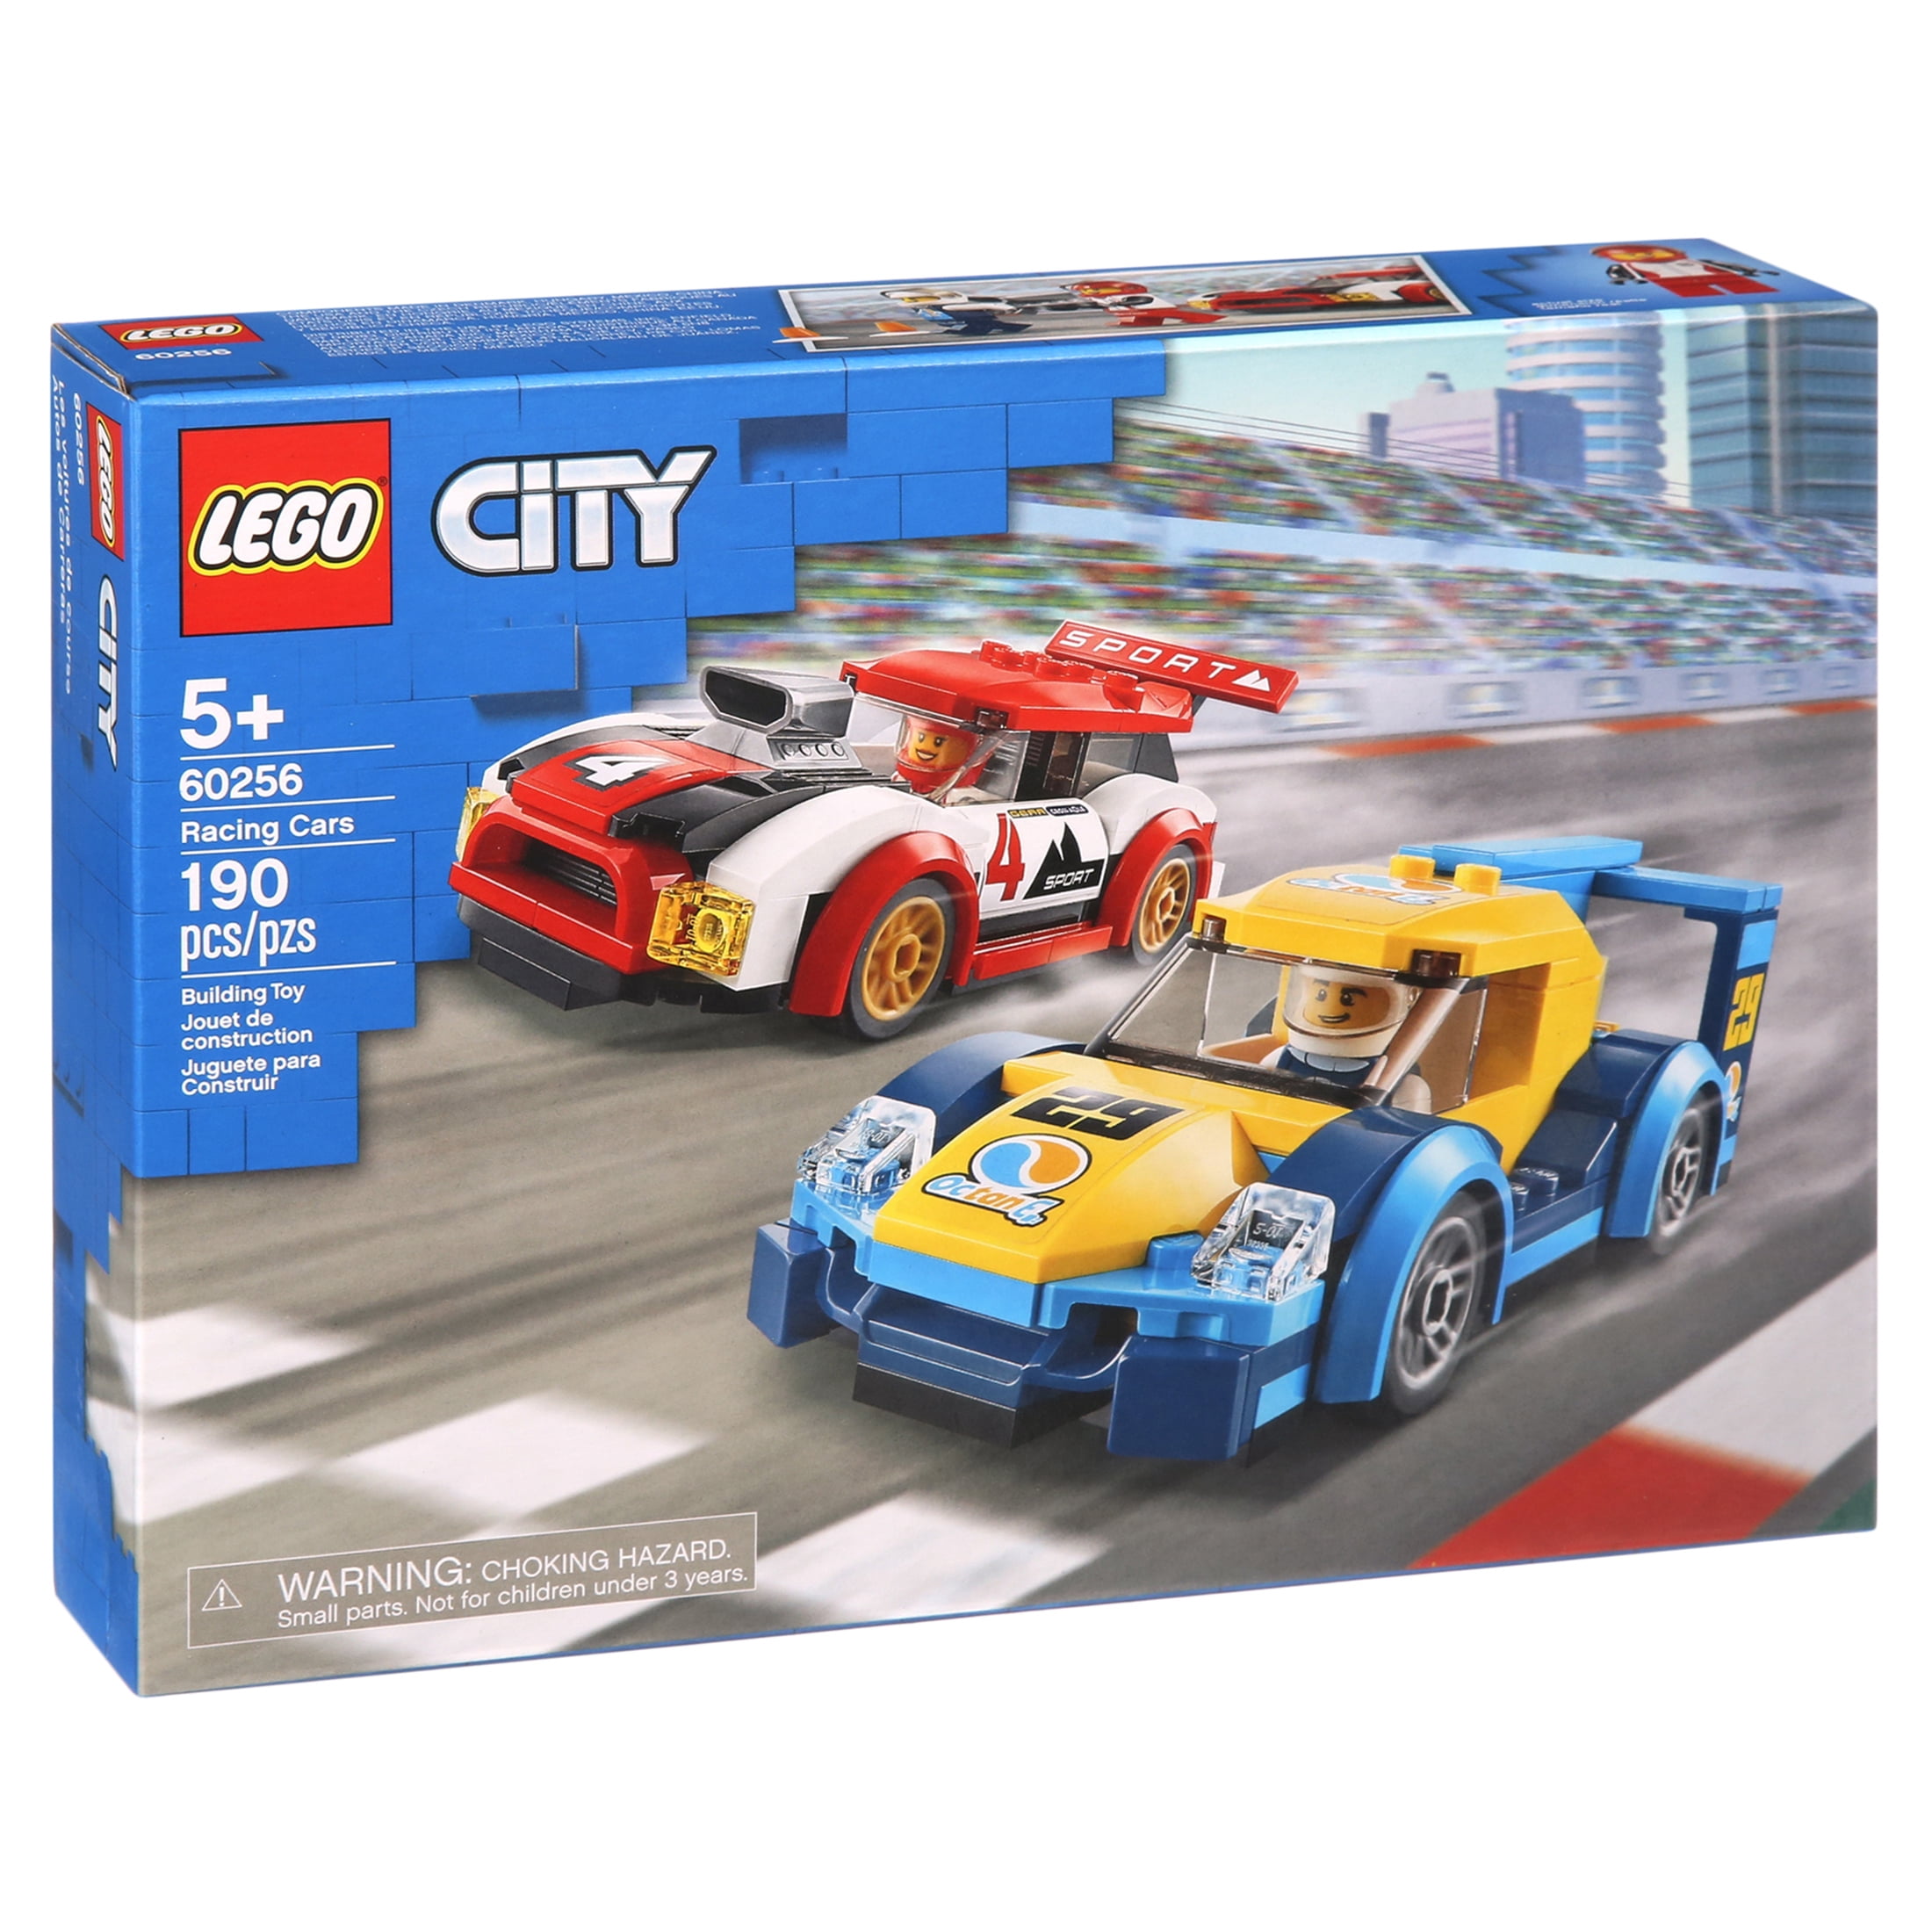 LEGO City Racing Cars 60256 Fun New 2020 190 Pieces Buildable Toy for Kids 